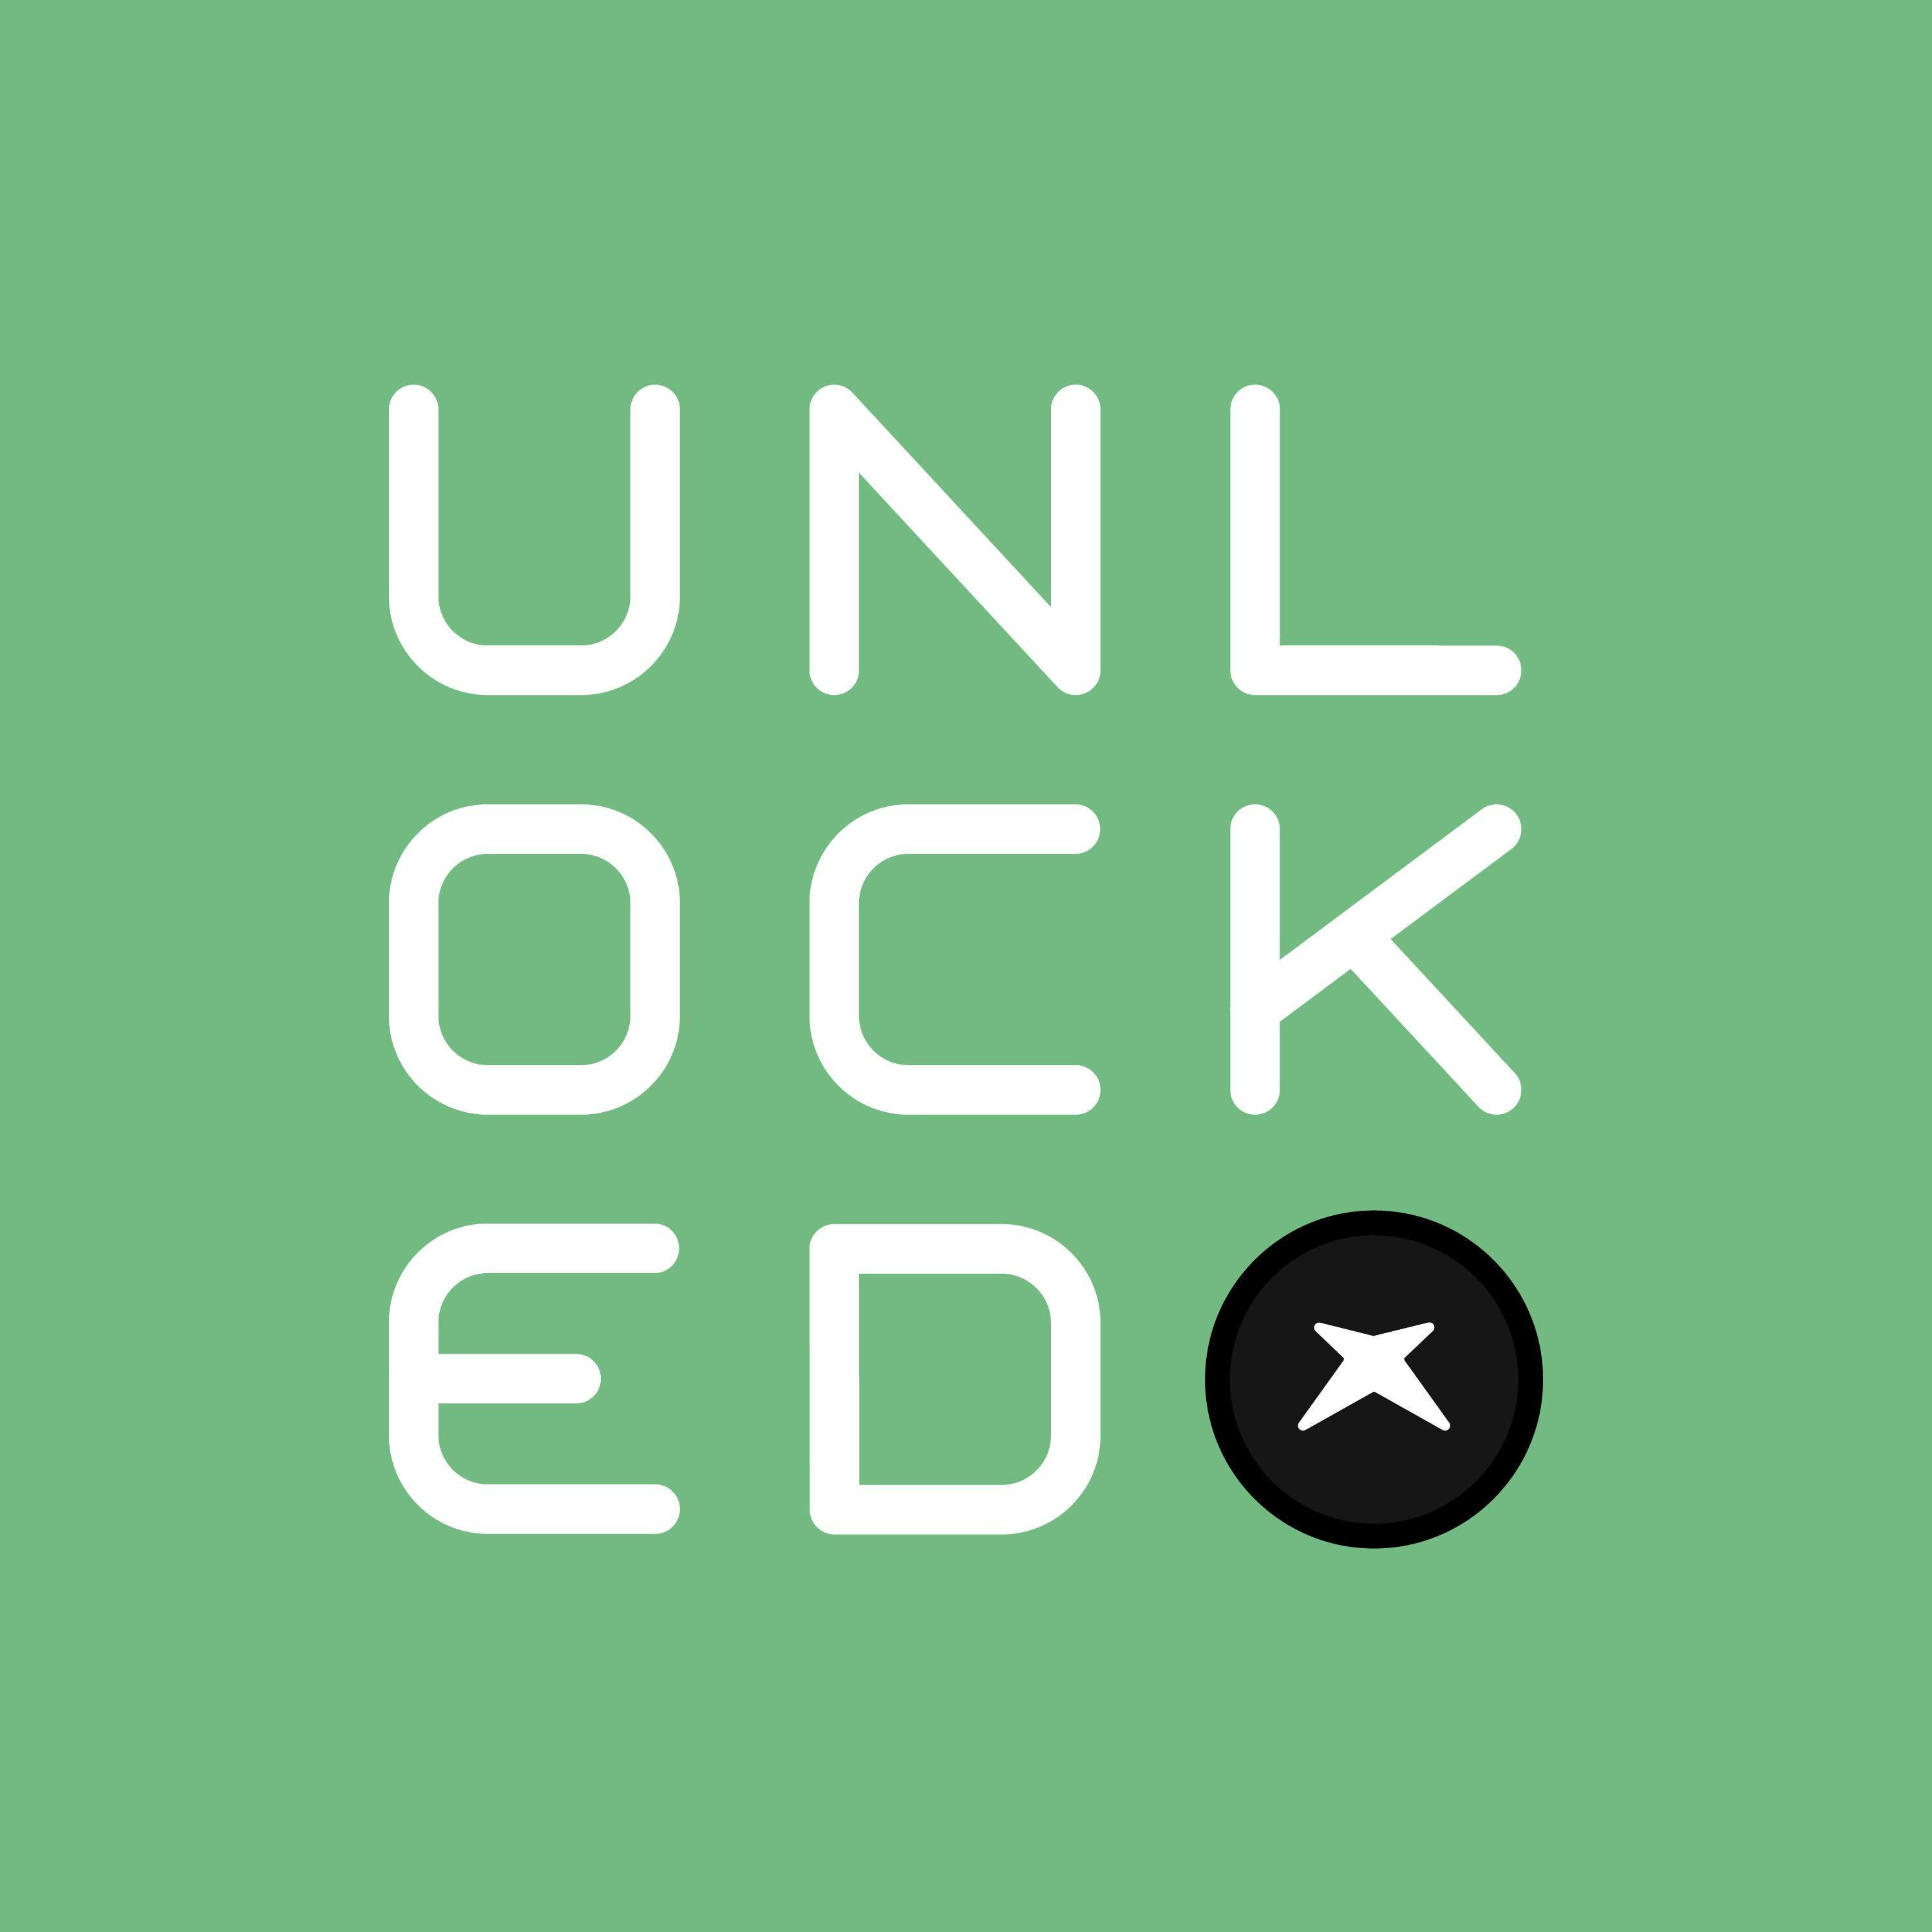 Podcast Unlocked Episode 269: Marty's Mass Effect Adventure